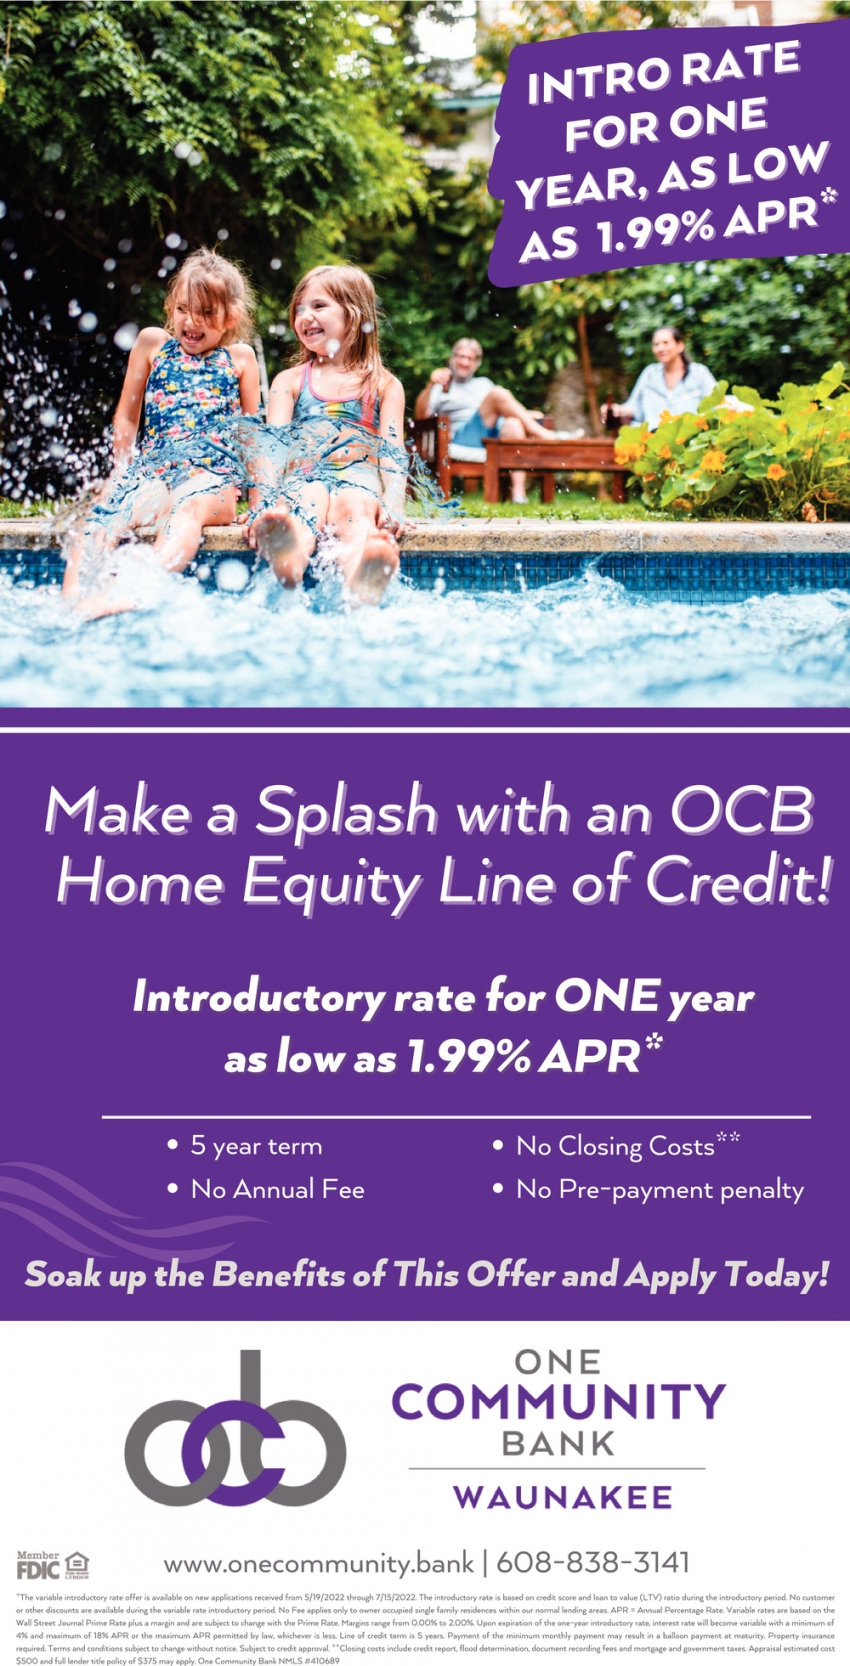 Intro Rate for One Year